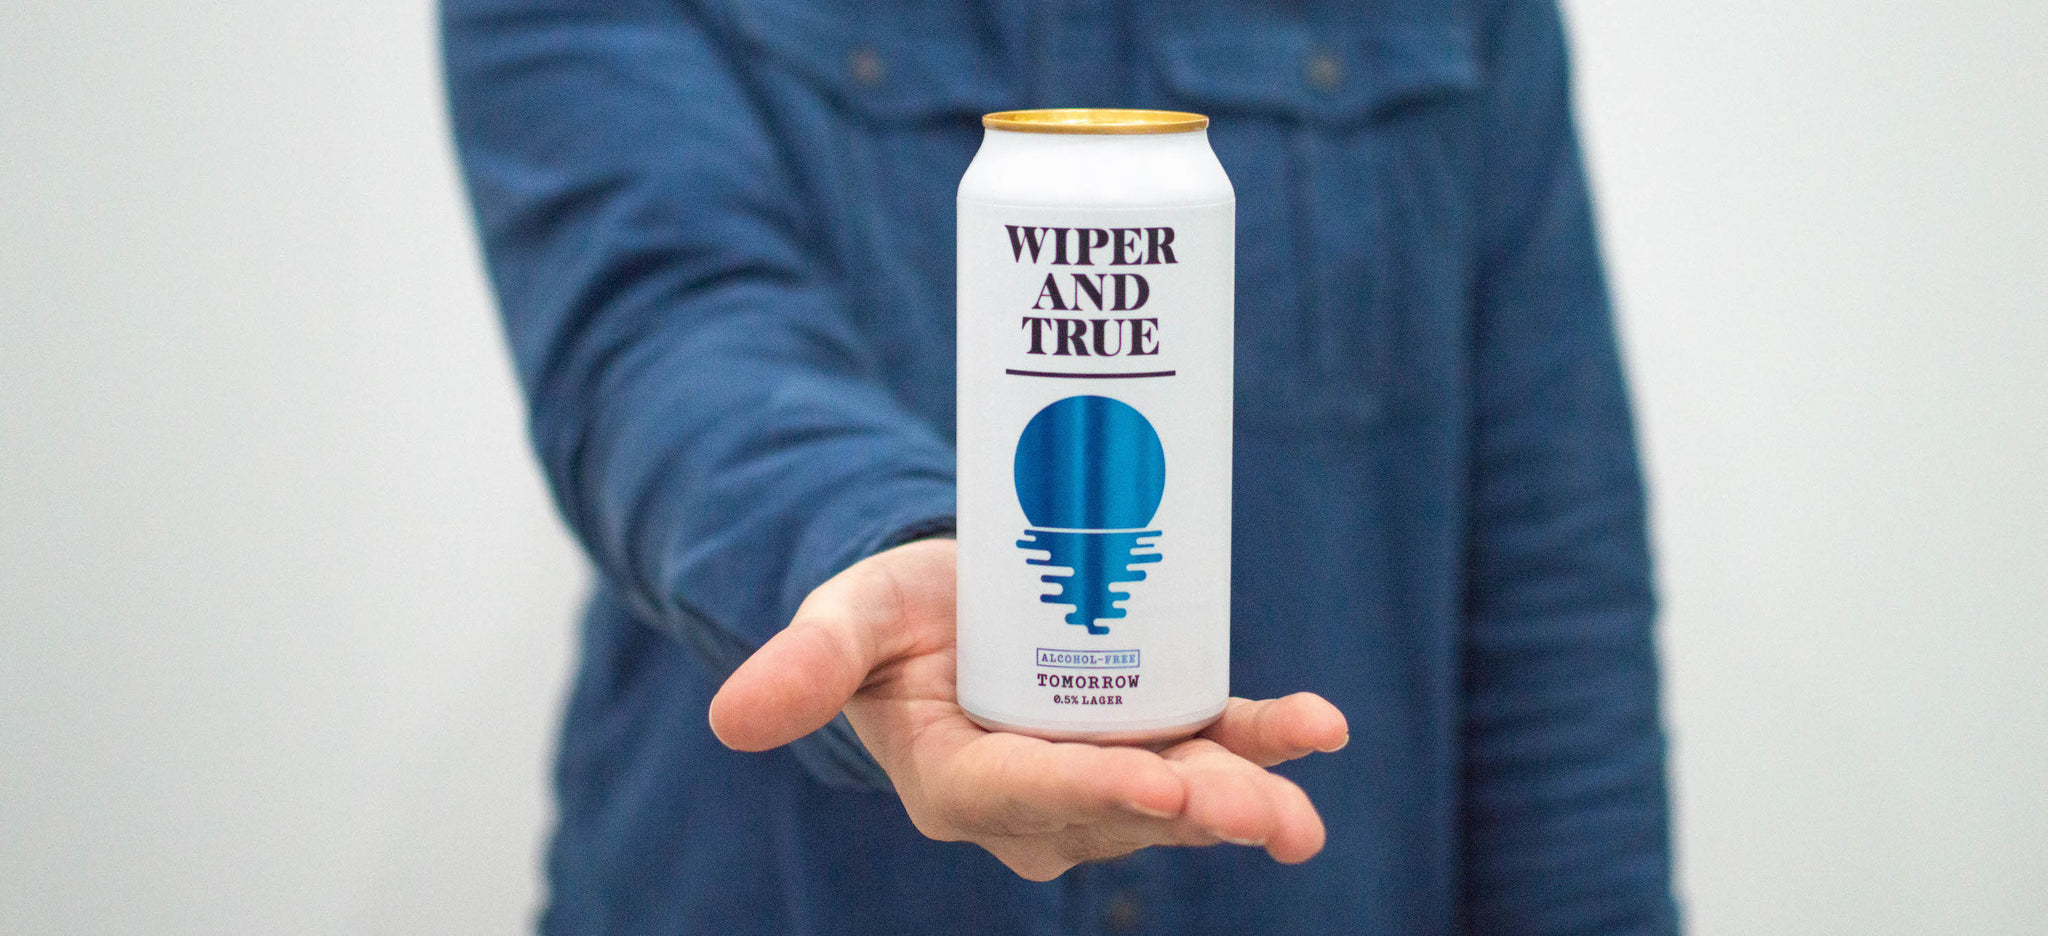 Tomorrow, Alcohol-Free Lager by Wiper and True